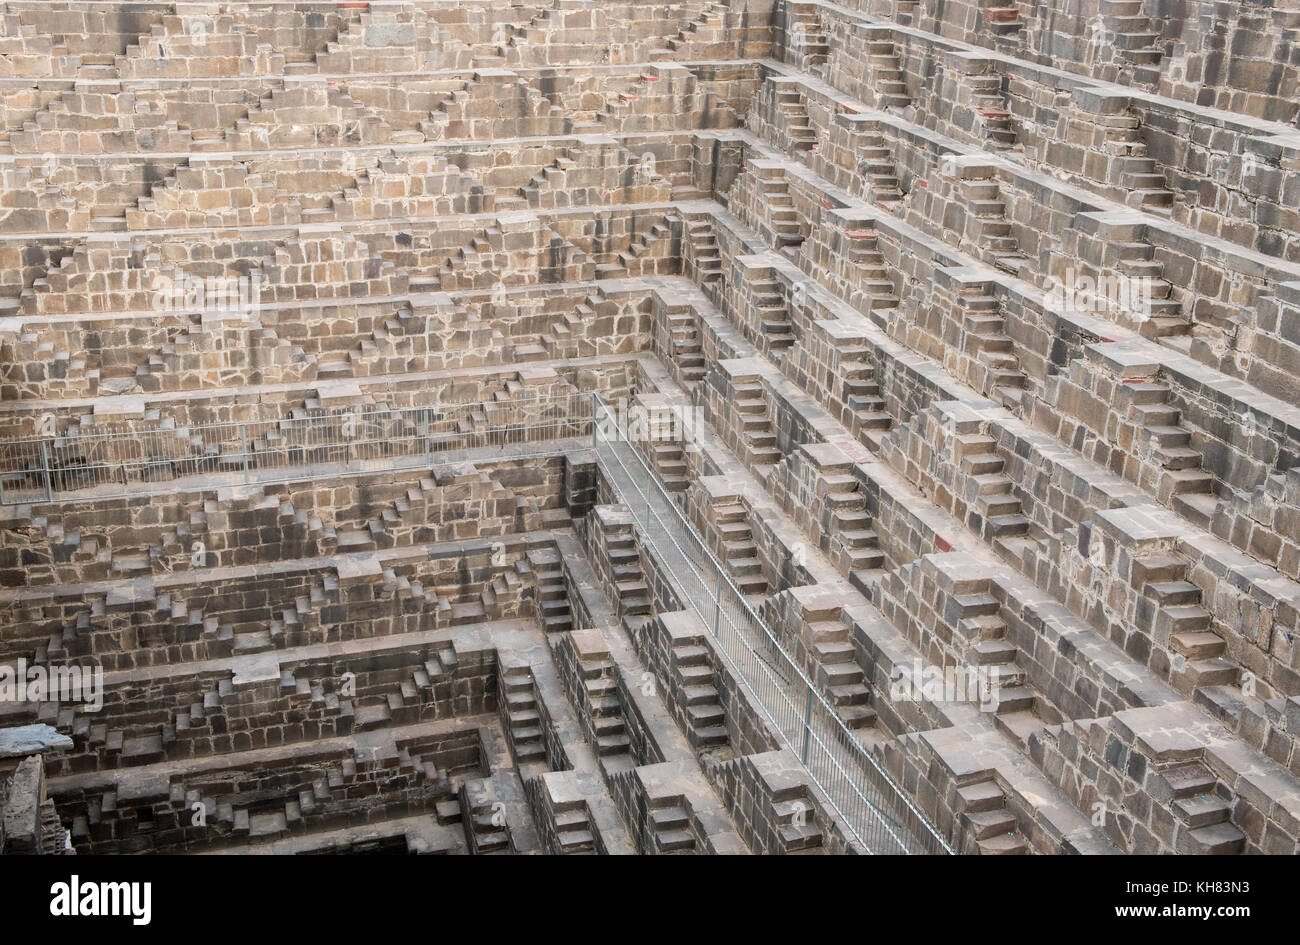 Details of the ancient stepwell of chand baori, at the village of  Abhaneri, near Jaipur, Rajasthan  in India Stock Photo